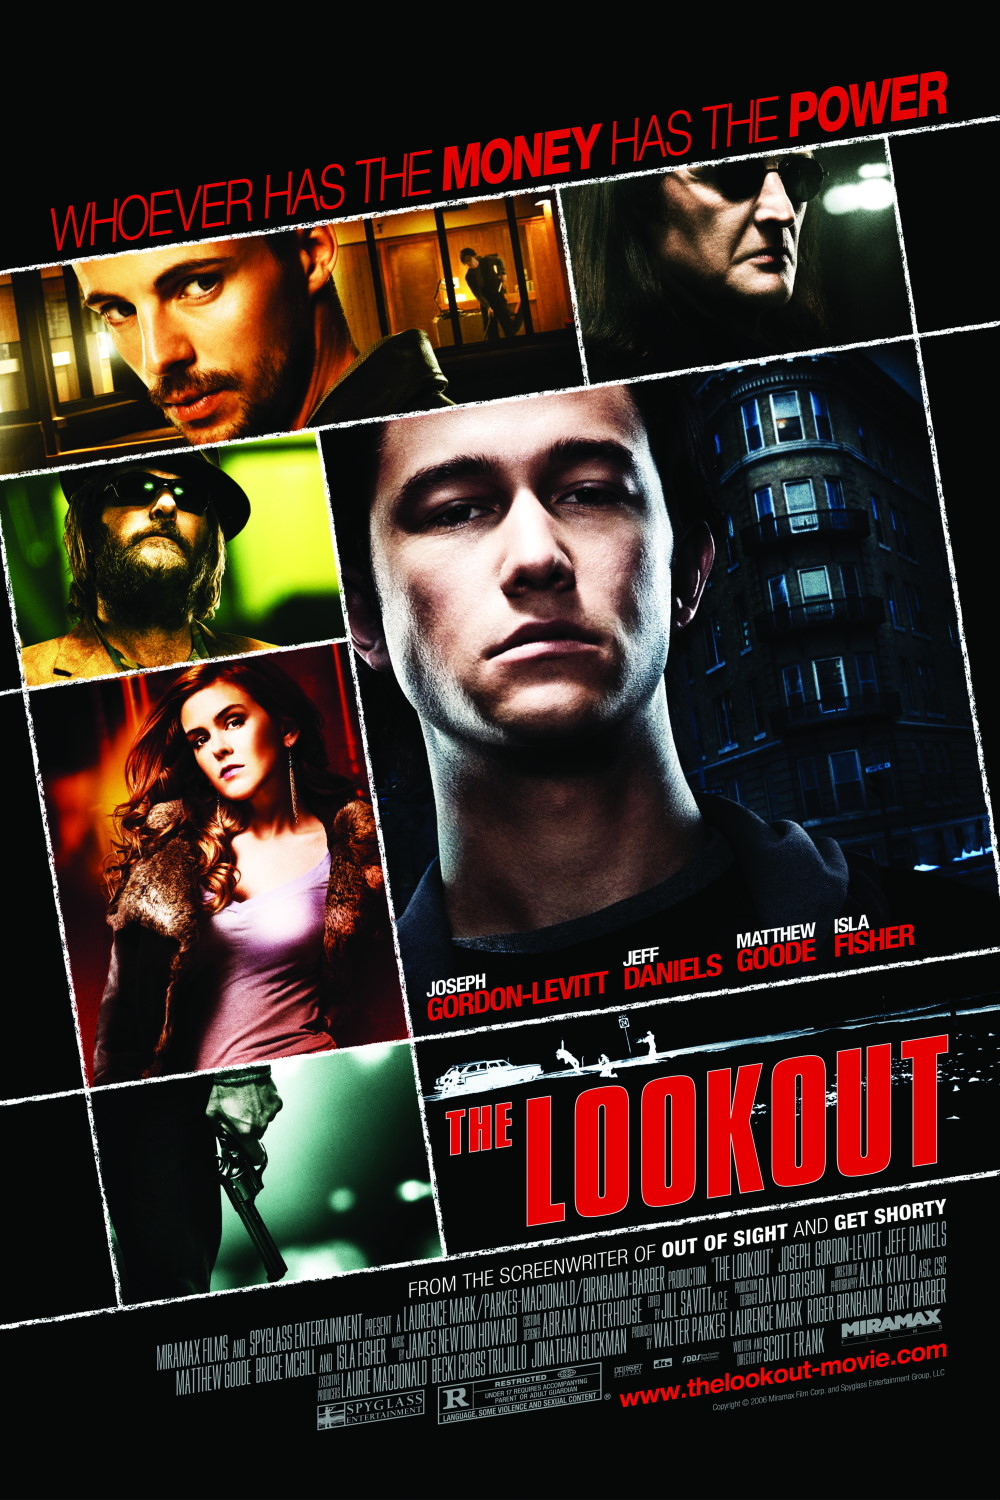 The Lookout (2007) Poster